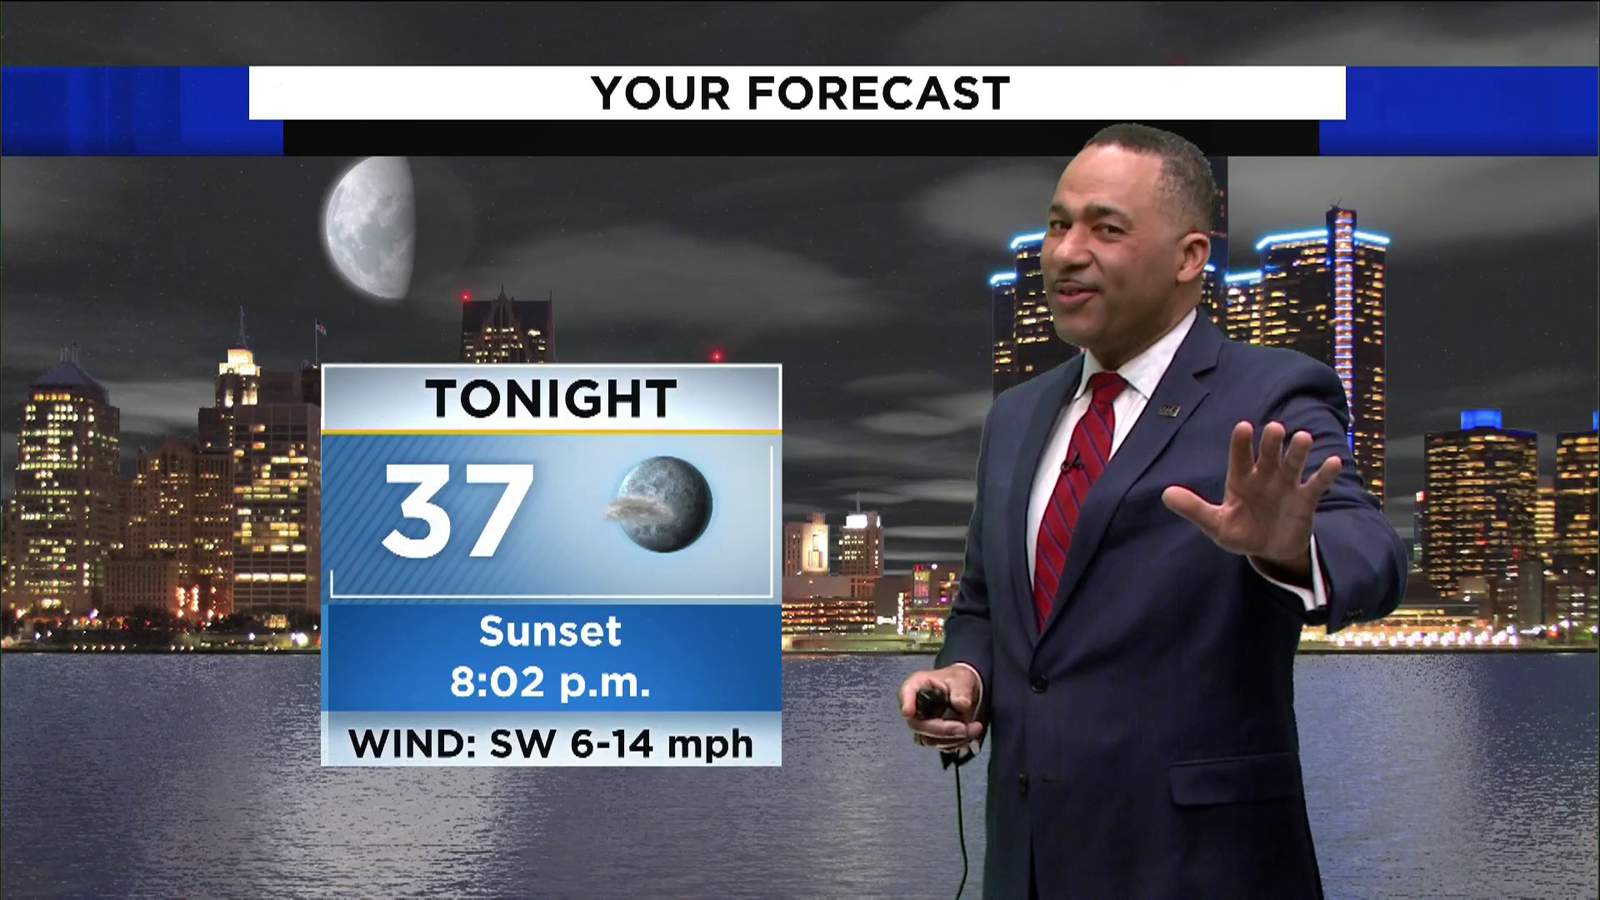 Metro Detroit weather: Mostly clear, chilly Saturday night then warmer Easter Sunday